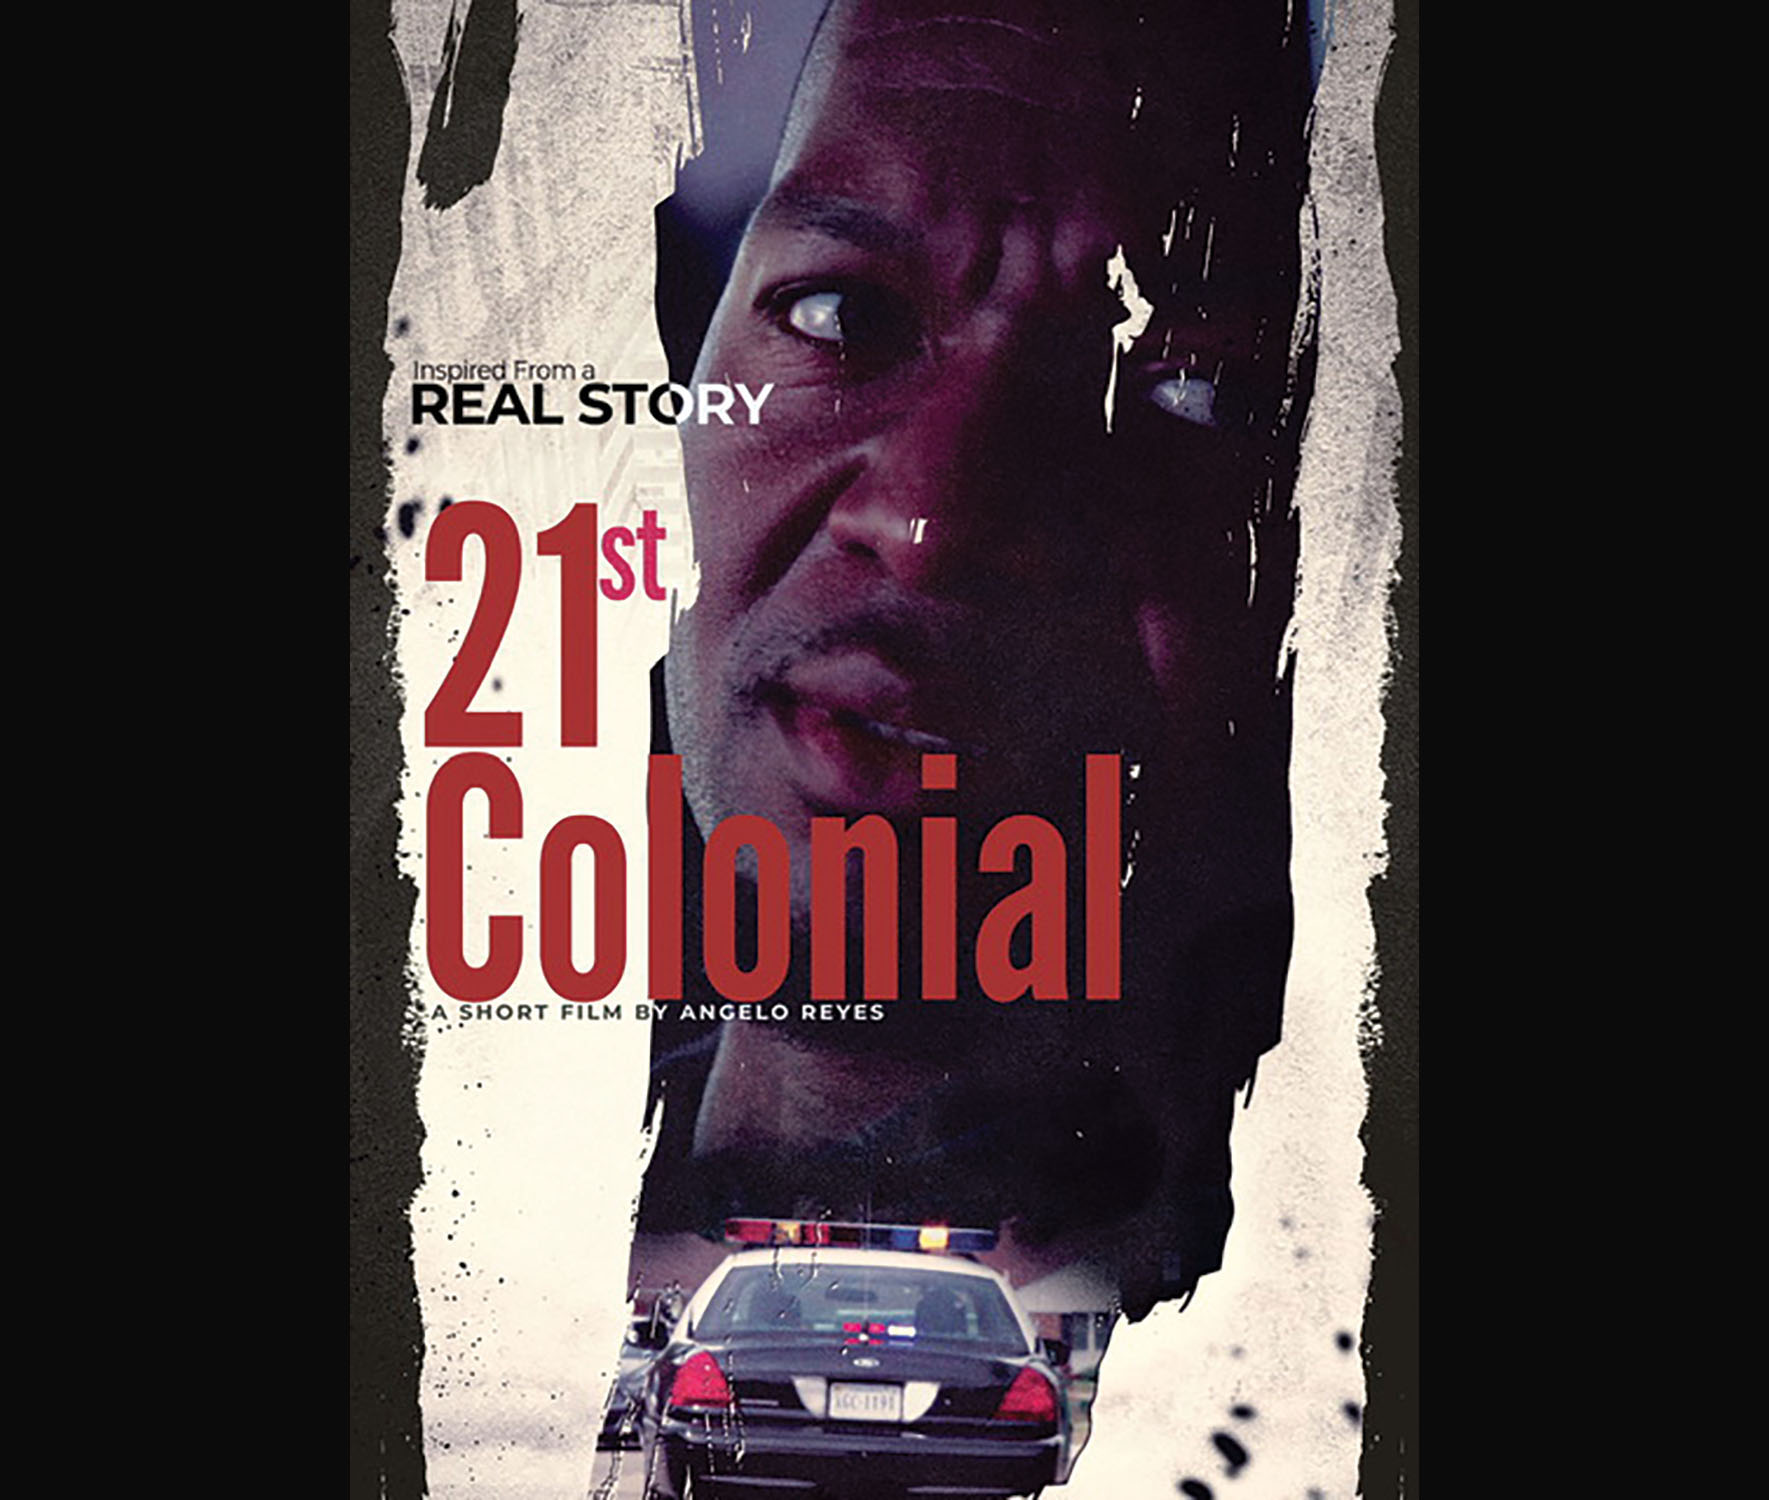 21 Colonial poster